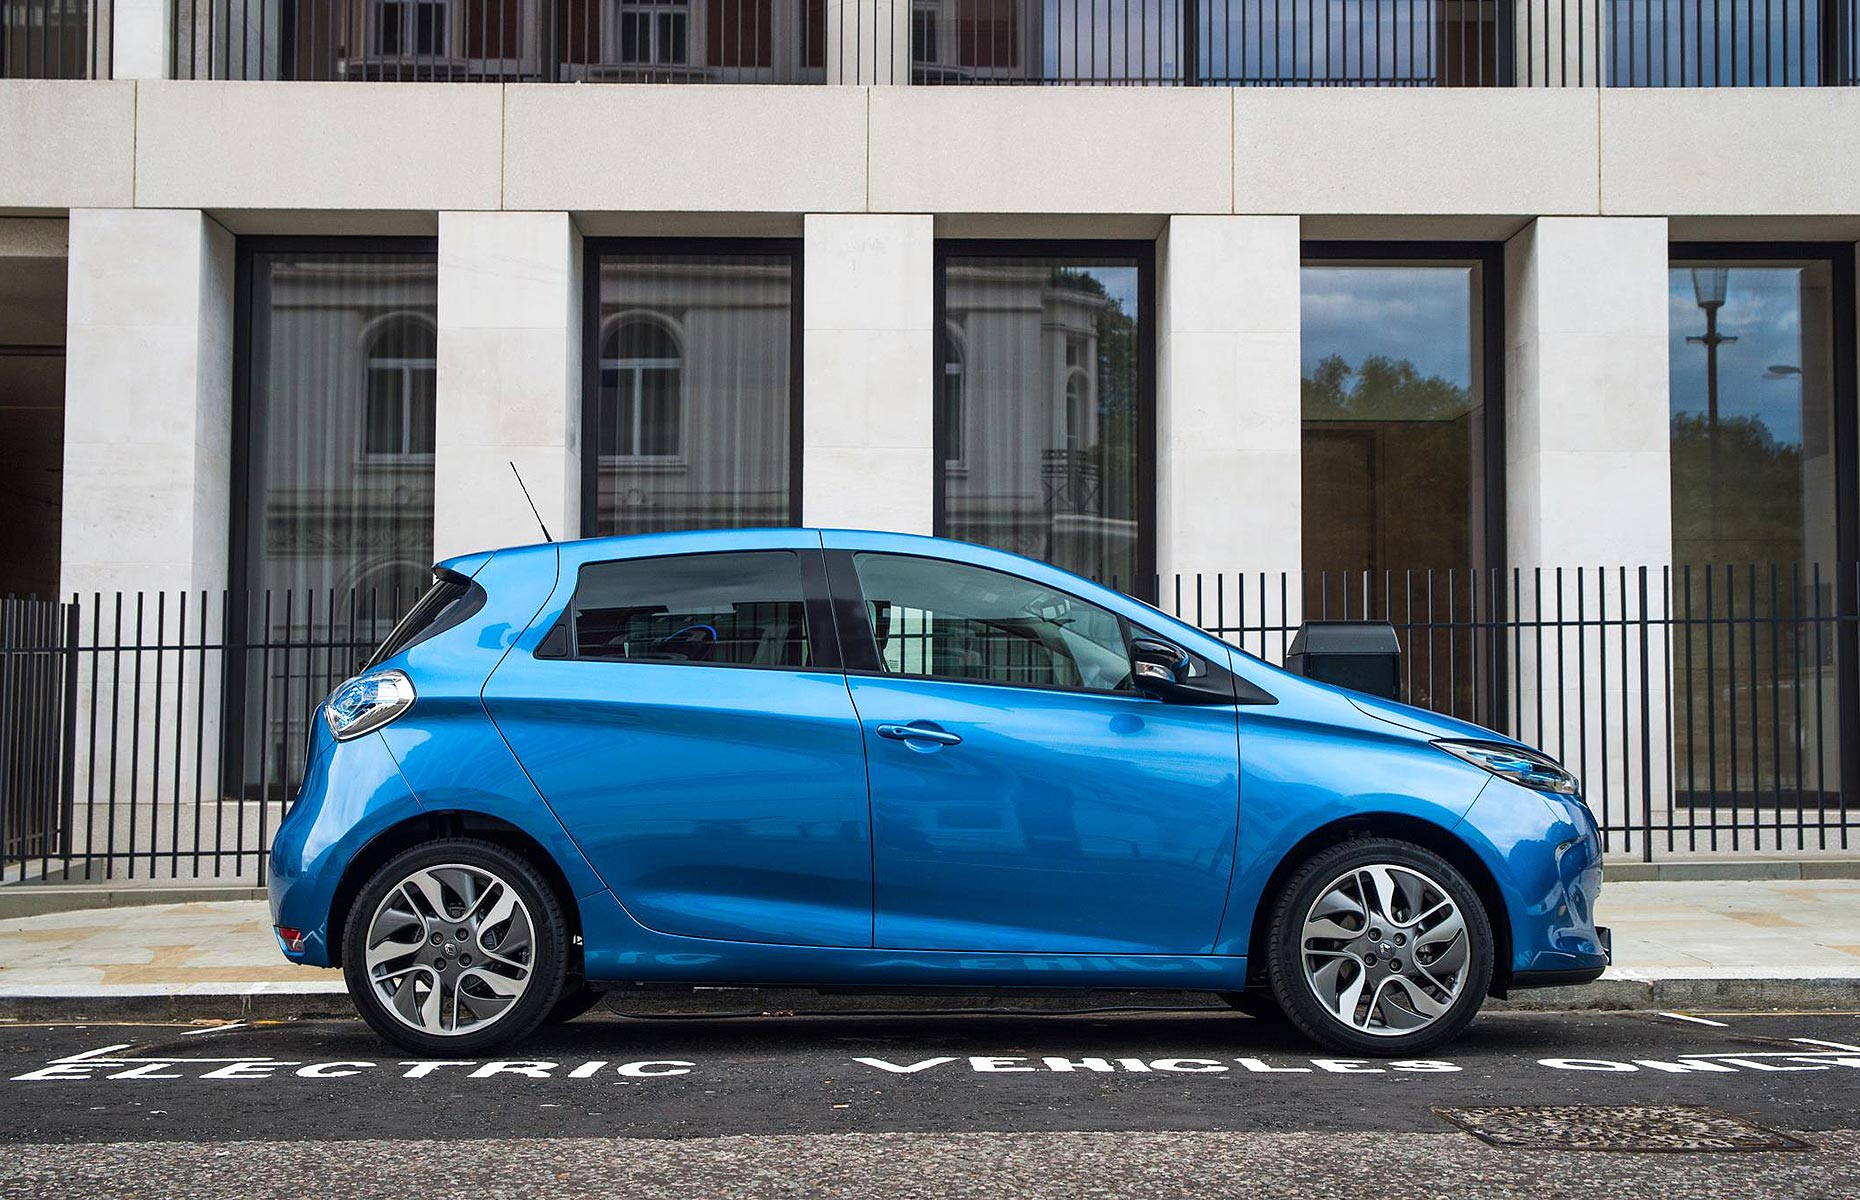 Renault Zoe one of the best used cars (Image: Shutterstock)